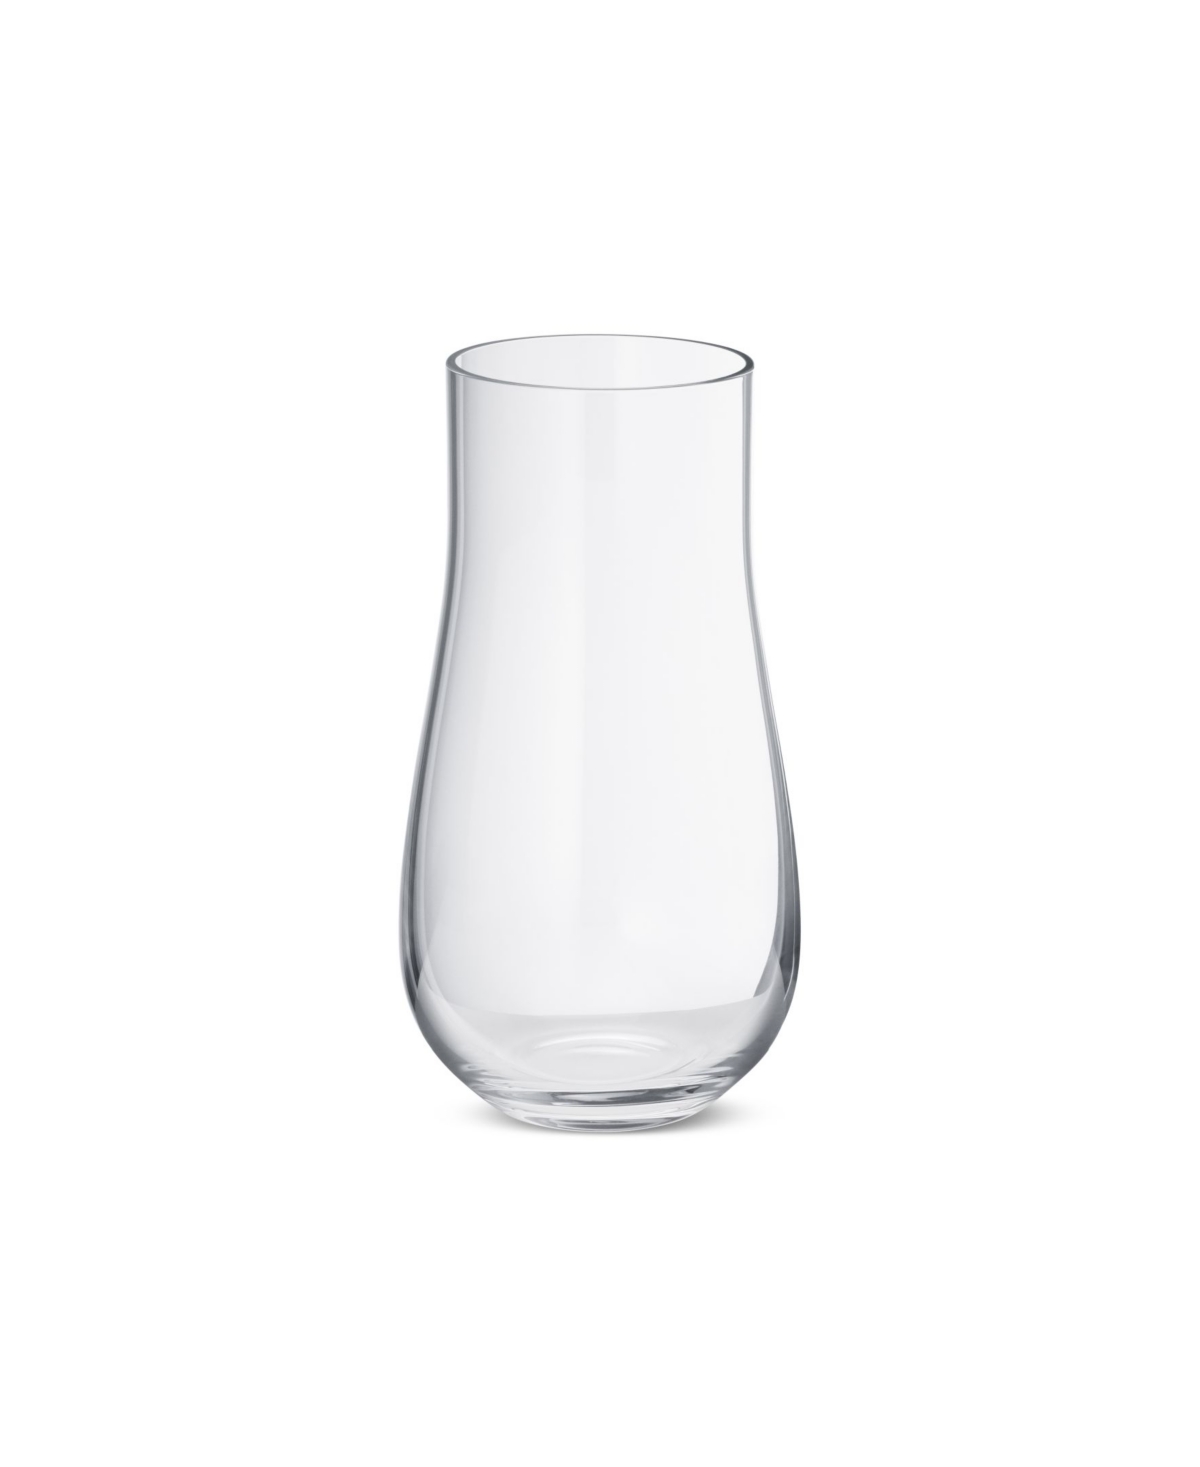 Georg Jensen Sky Tall Tumbler Set, 6 Pieces In Clear Glass